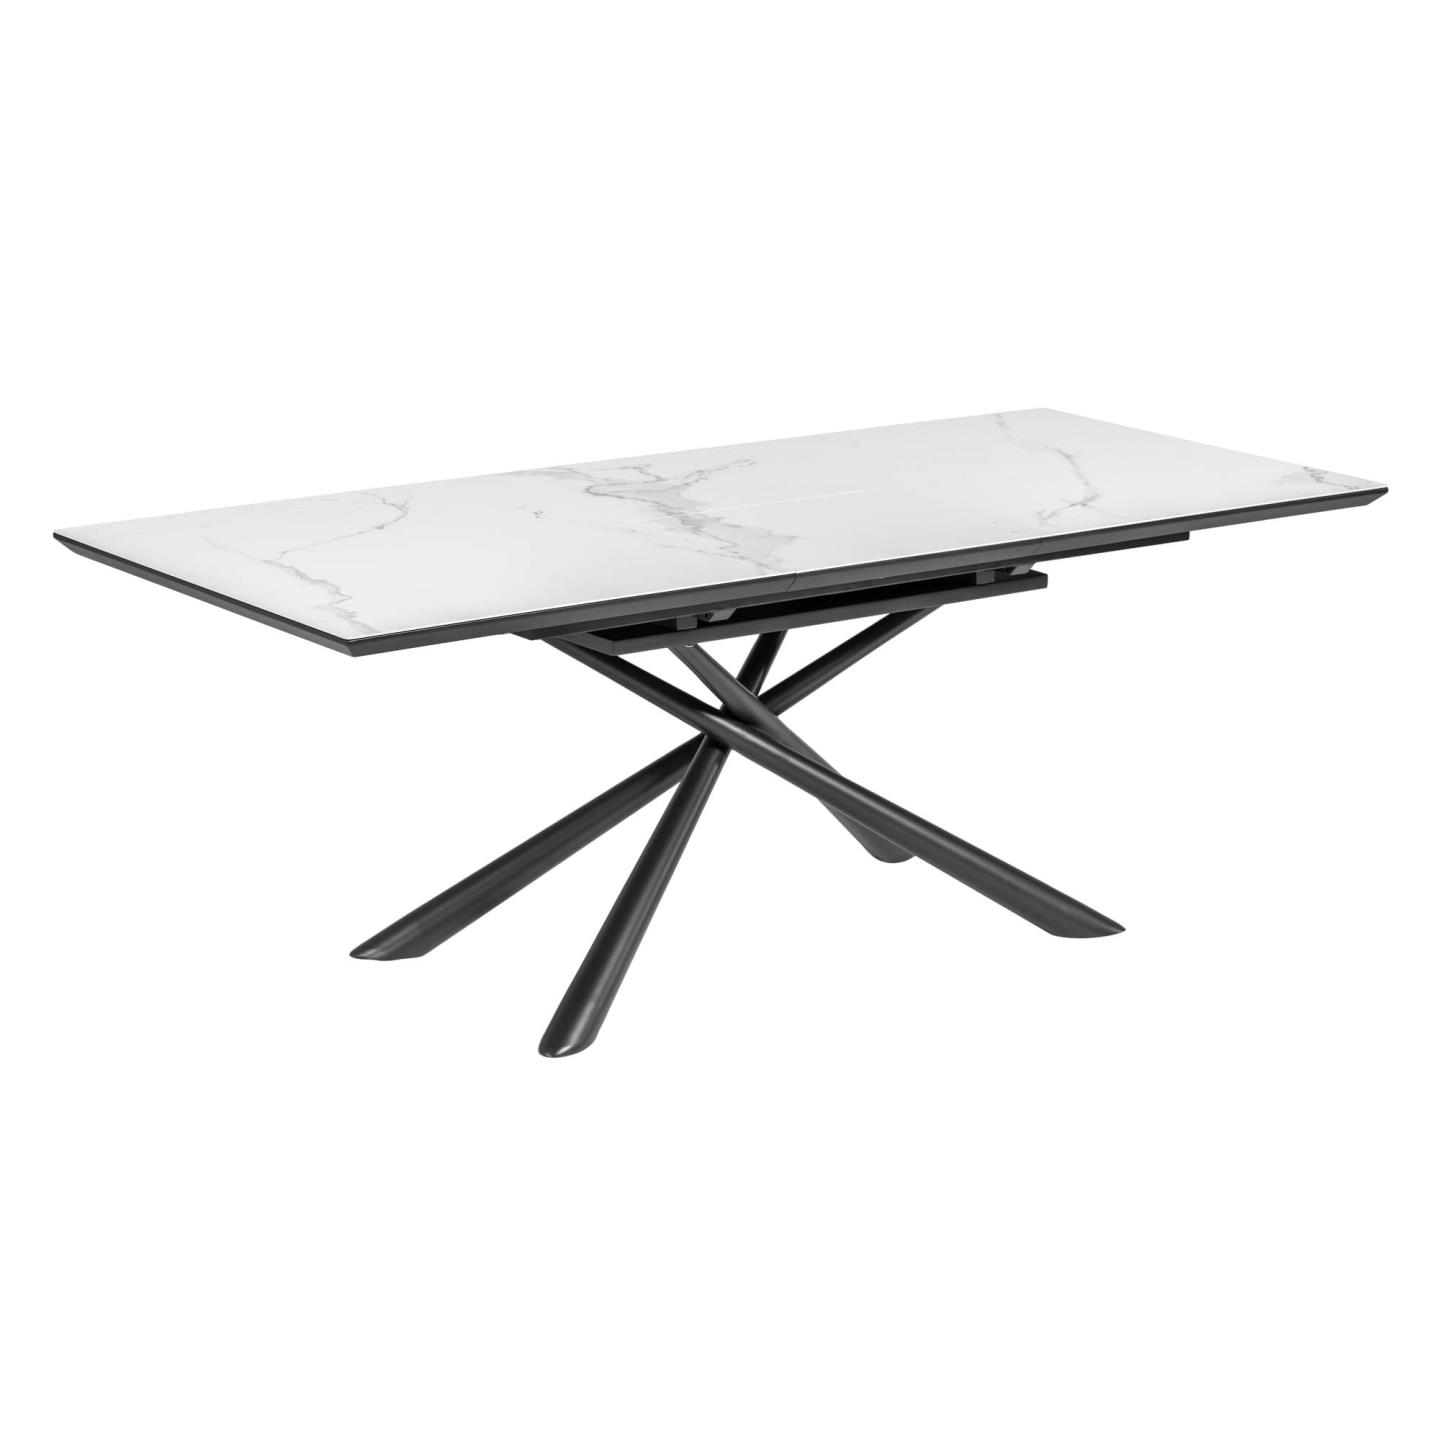 Theone porcelain extendable table in white and black steel legs 160 (210) x 90 cm